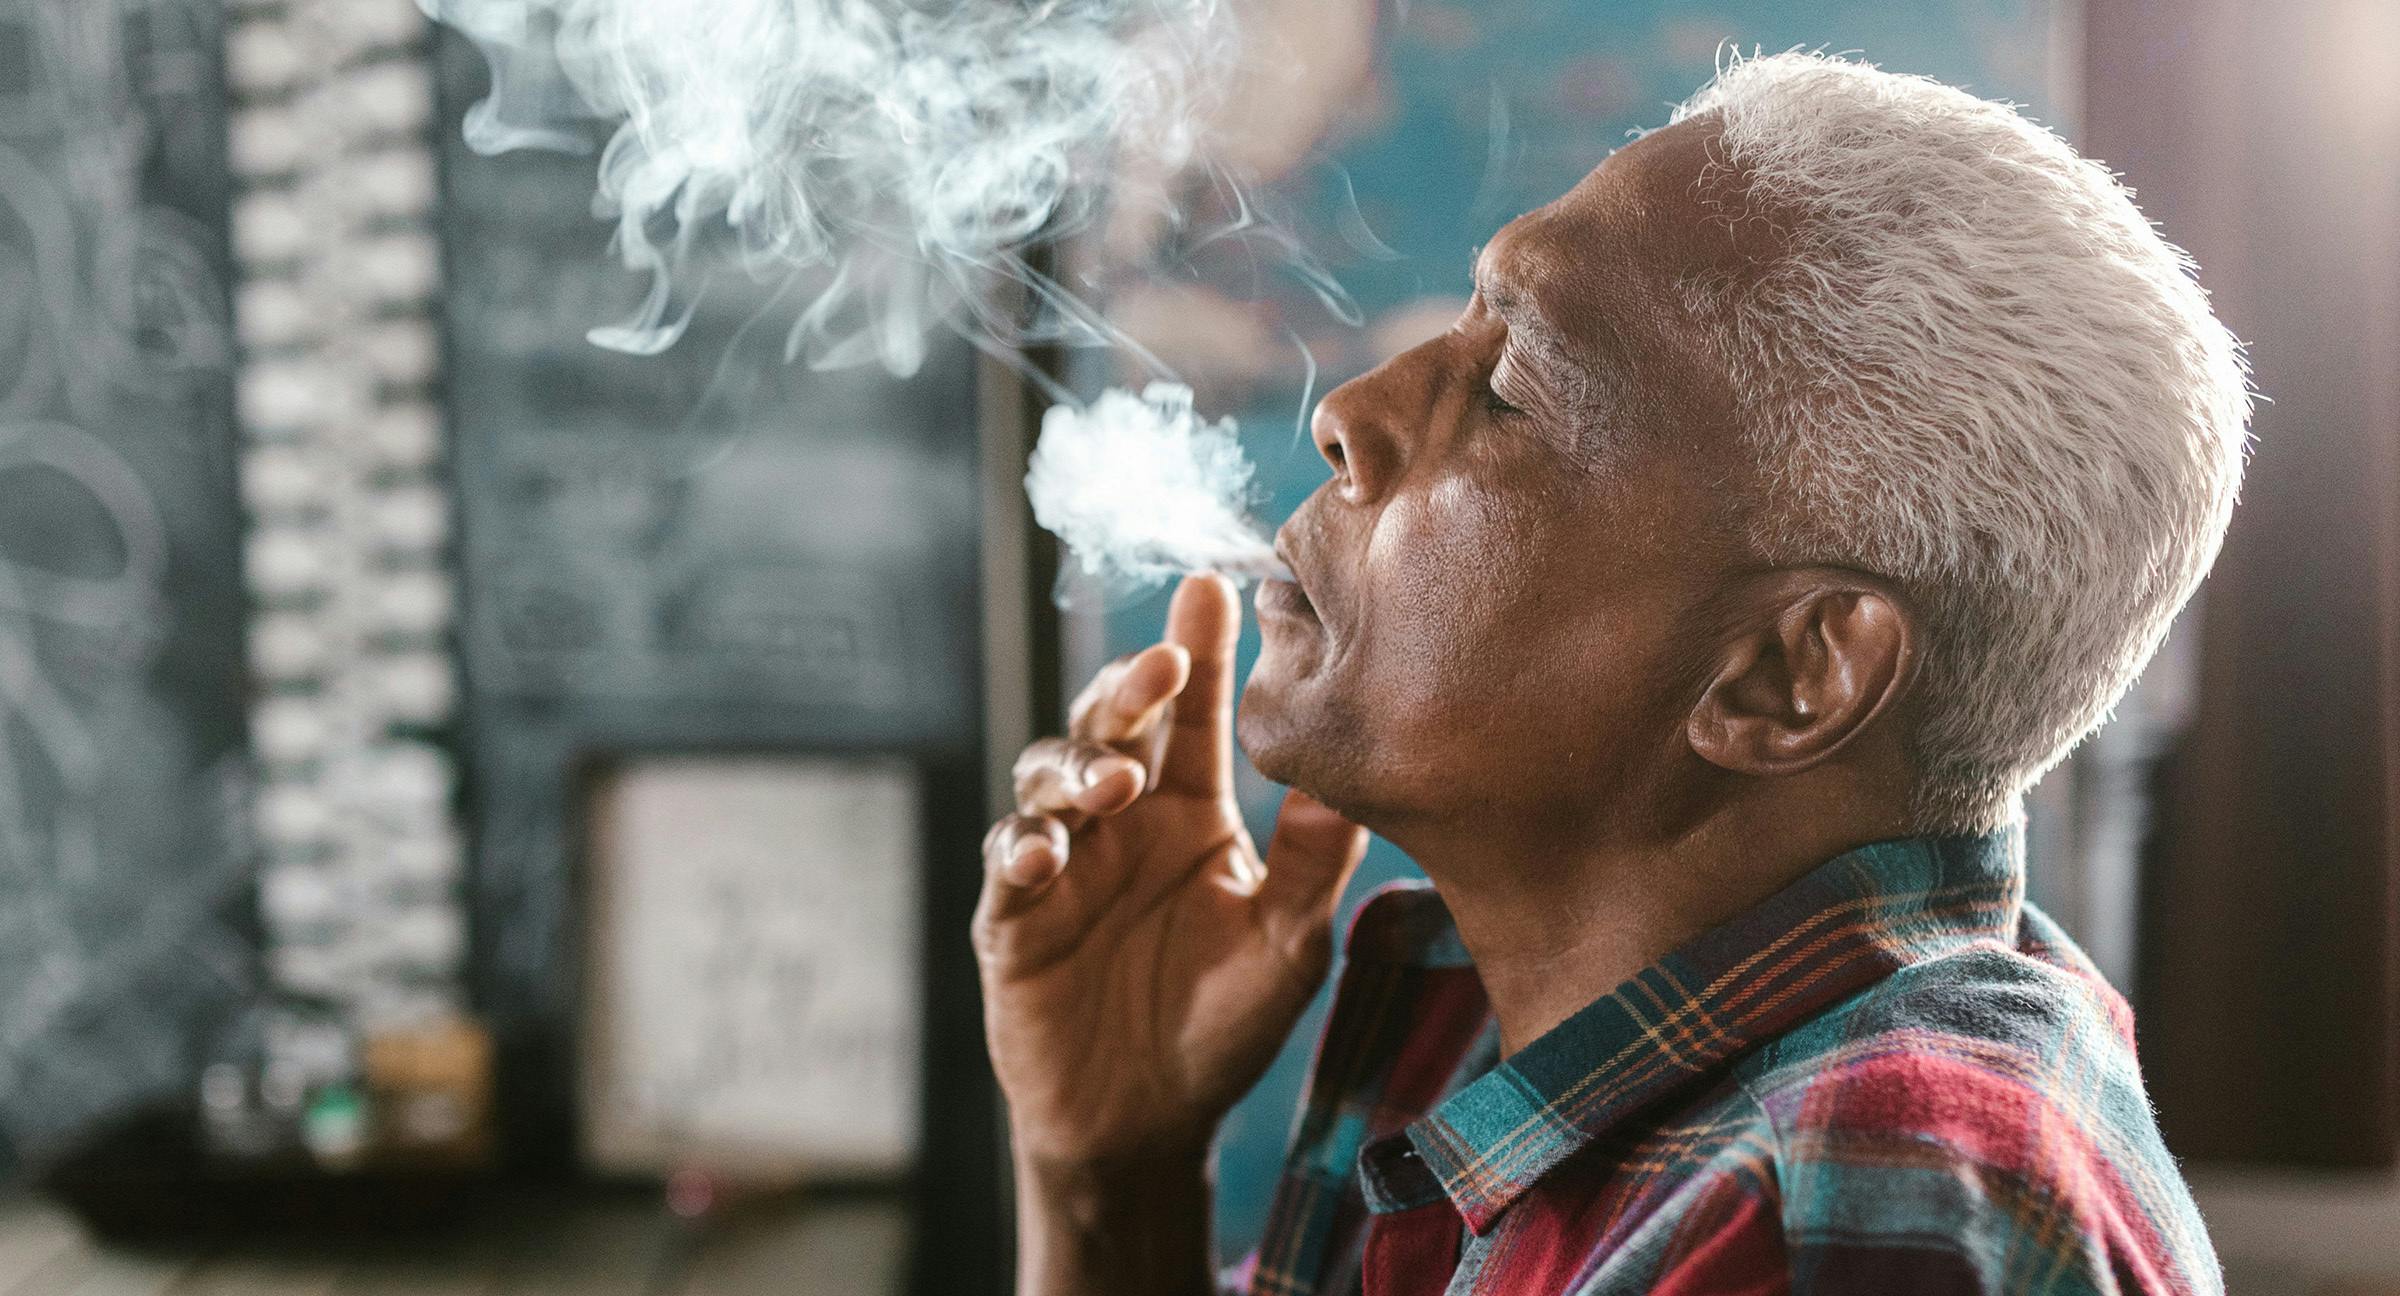 older man is seen smoking medical cannabis joint